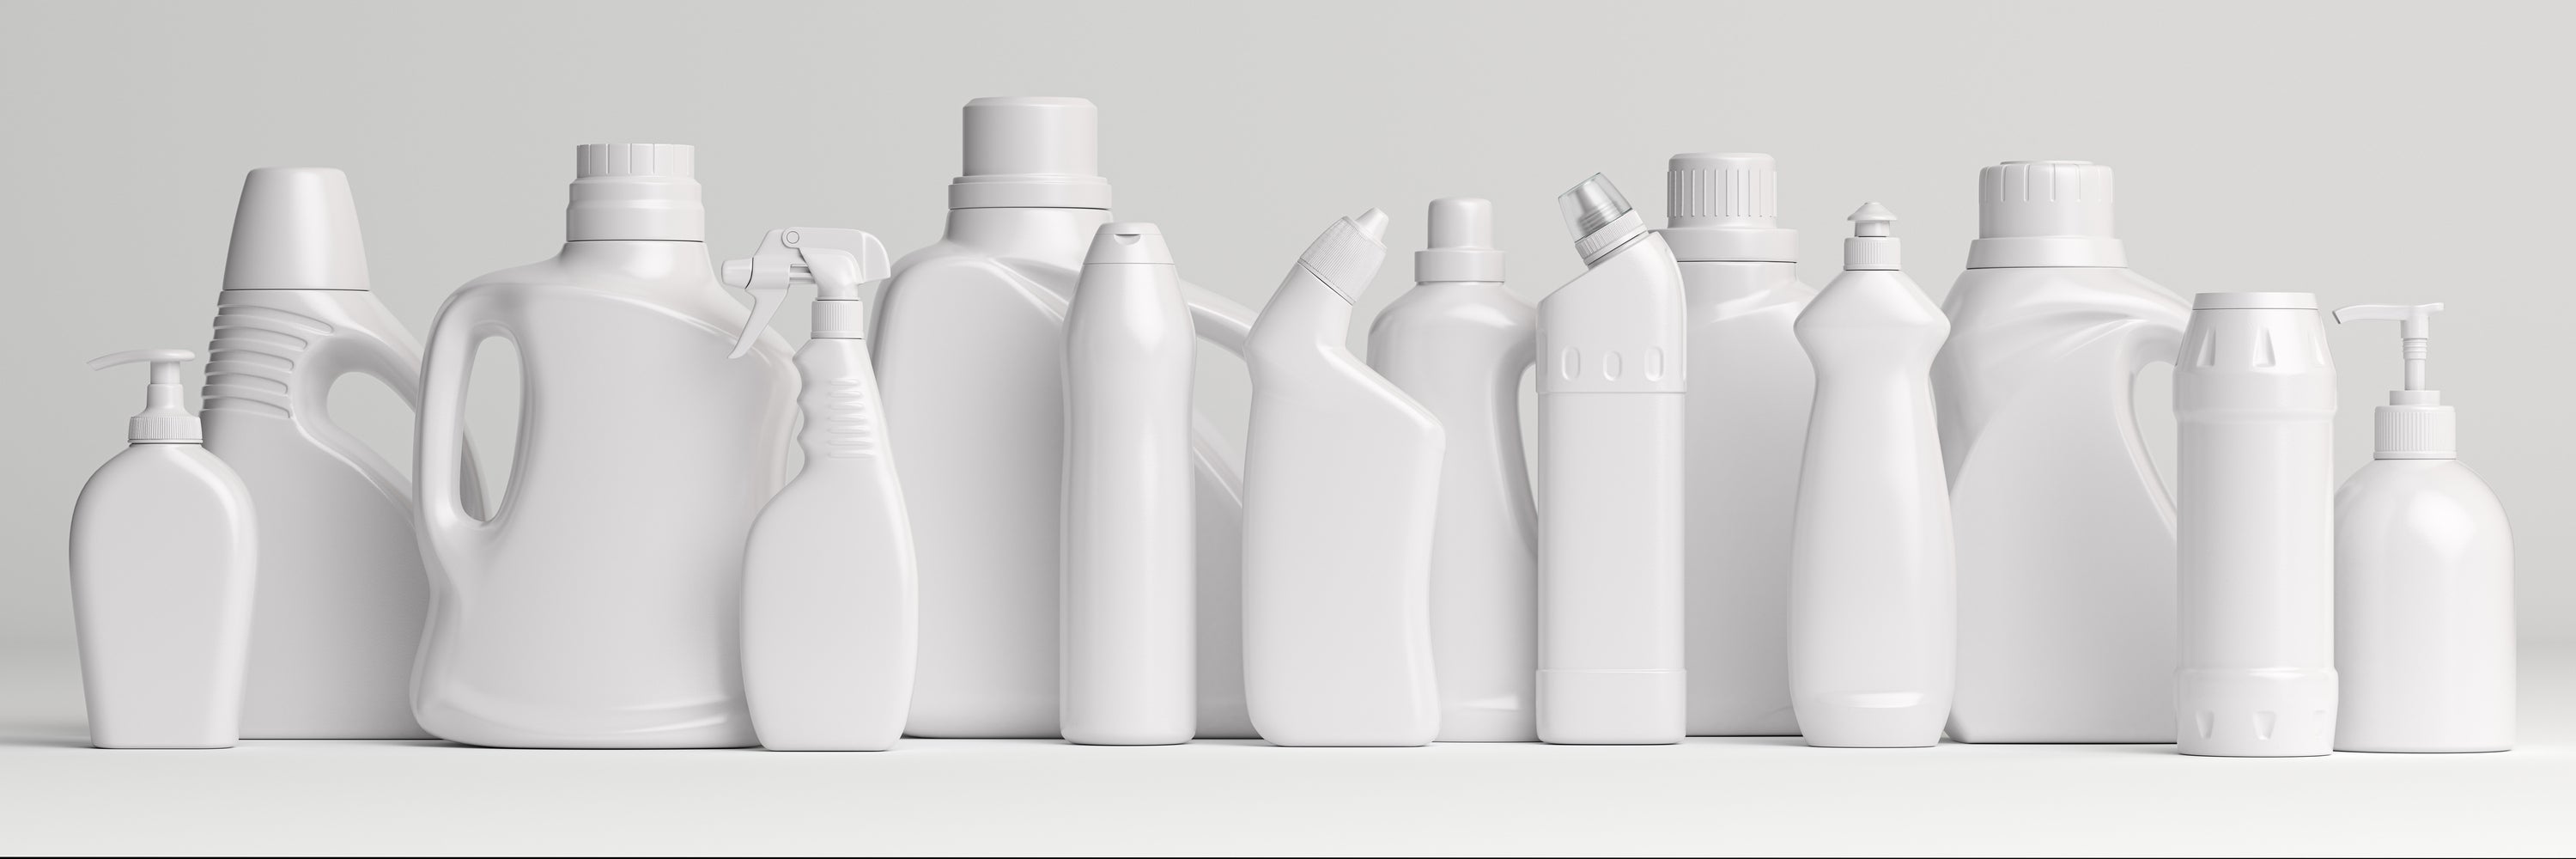 The chemicals are used in a wide variety of plastic packaging